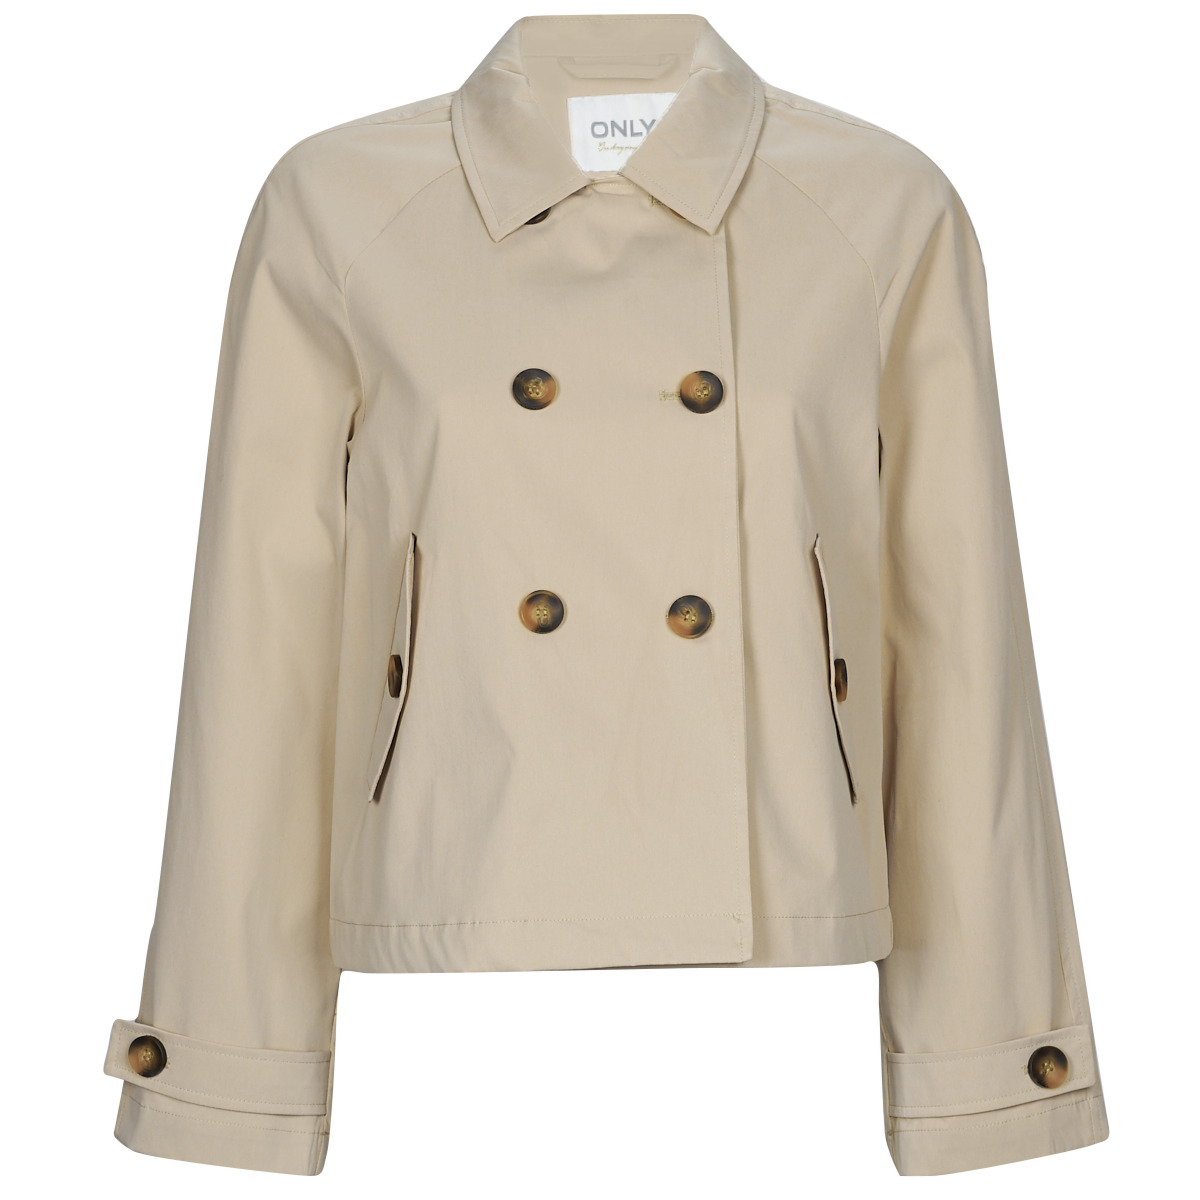 Only ONLAPRIL SHORT Spartoo TRENCHCOAT Trench ! NET - | Clothing Women delivery CC Beige - Free coats